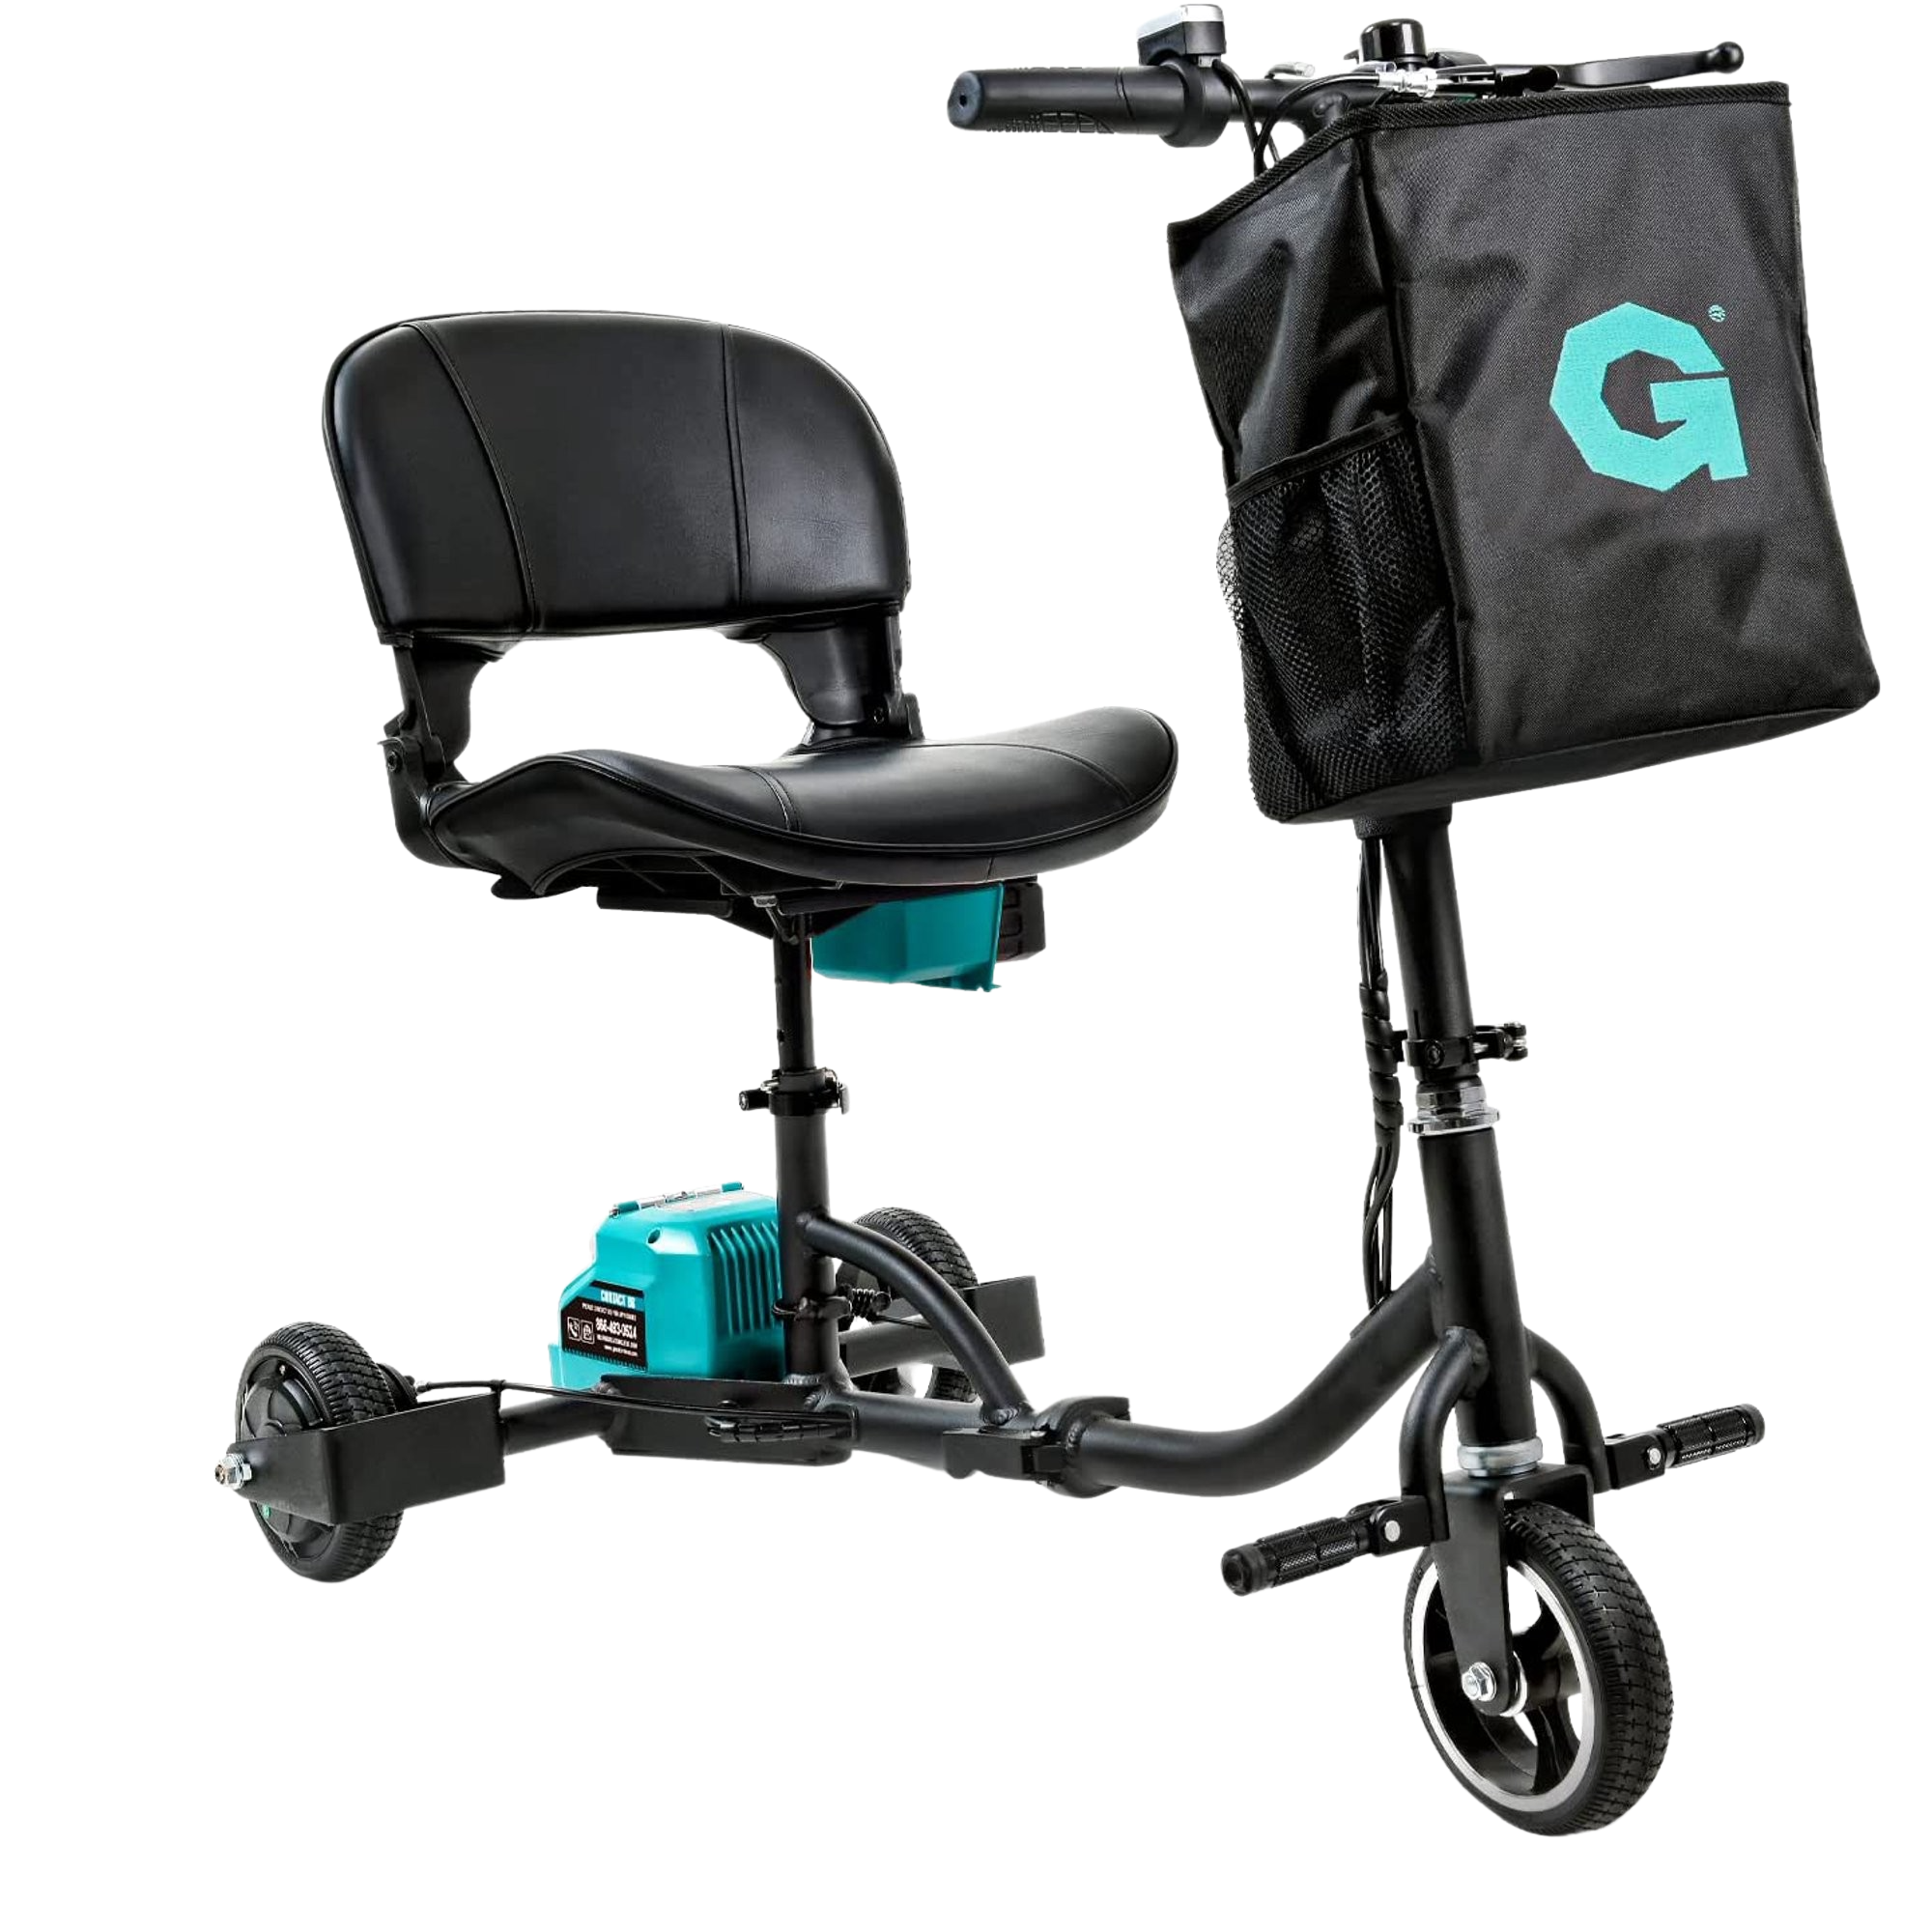 G, G GUT142 Lightweight 48V Long Range Folding Electric Mobility Scooter plus Extra Battery New